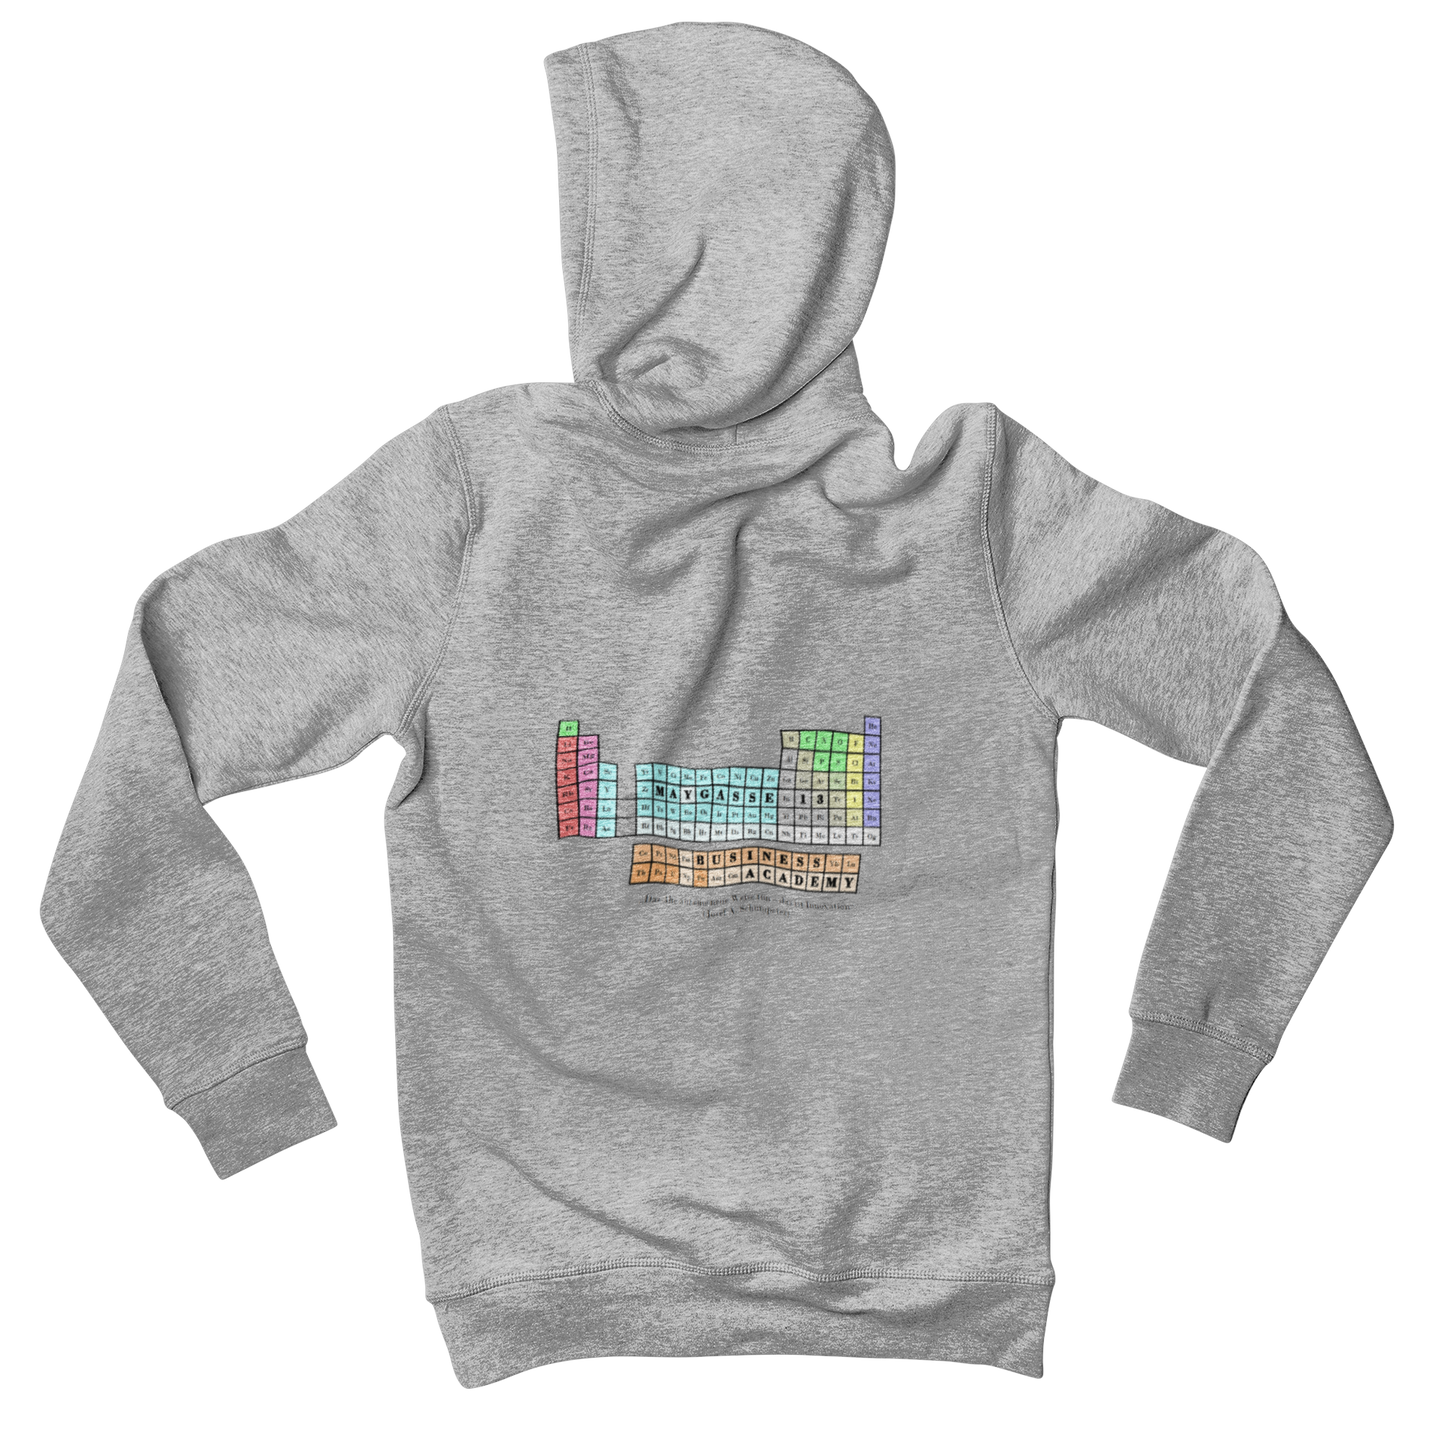 Maygasse Business Academy - Basic Hoodie - "Periodensystem"